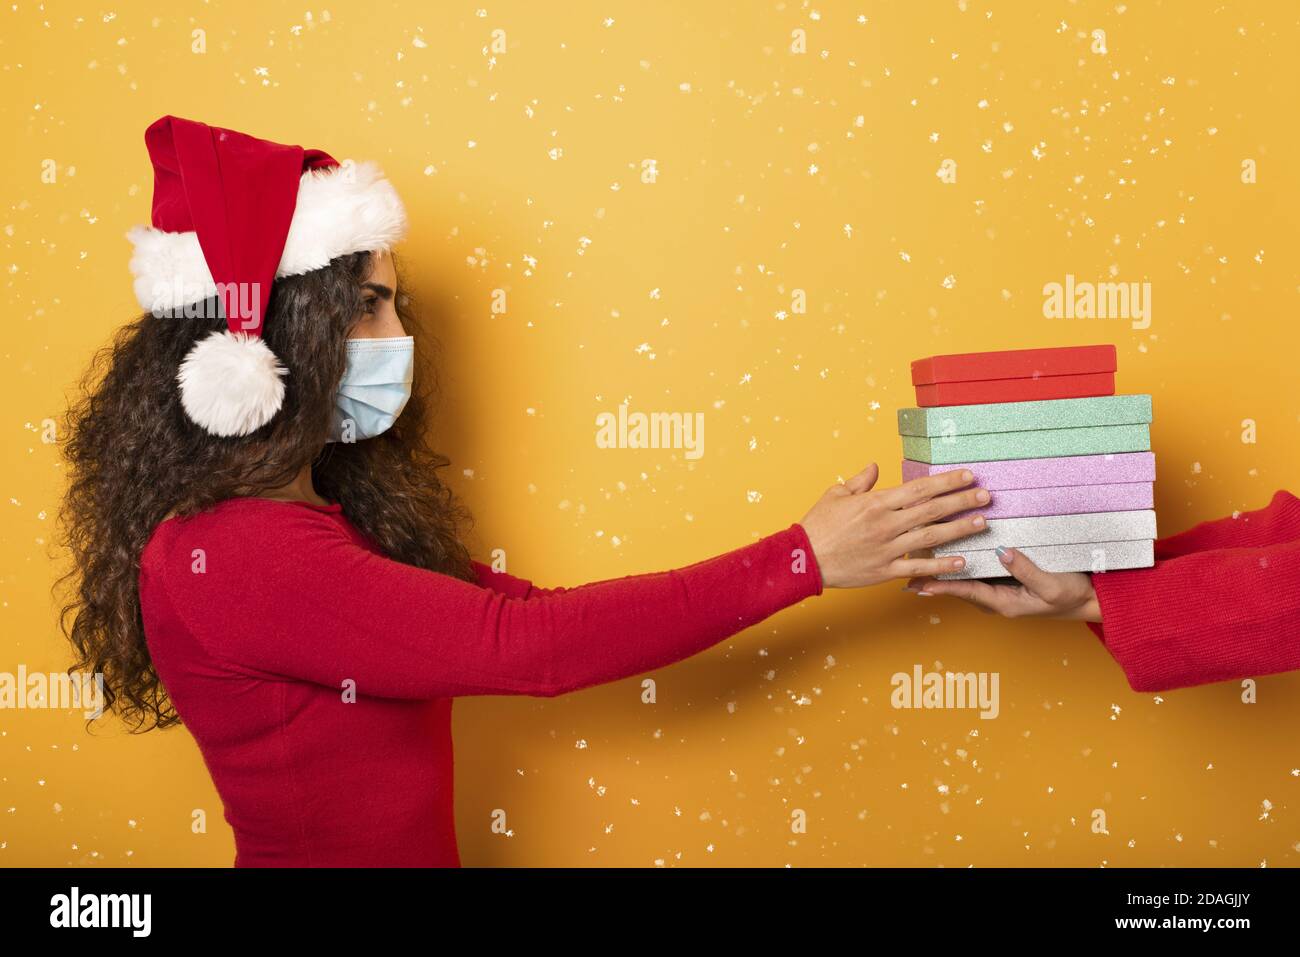 Happy girl receives Christmas gifts from a friend. Yellow background Stock Photo